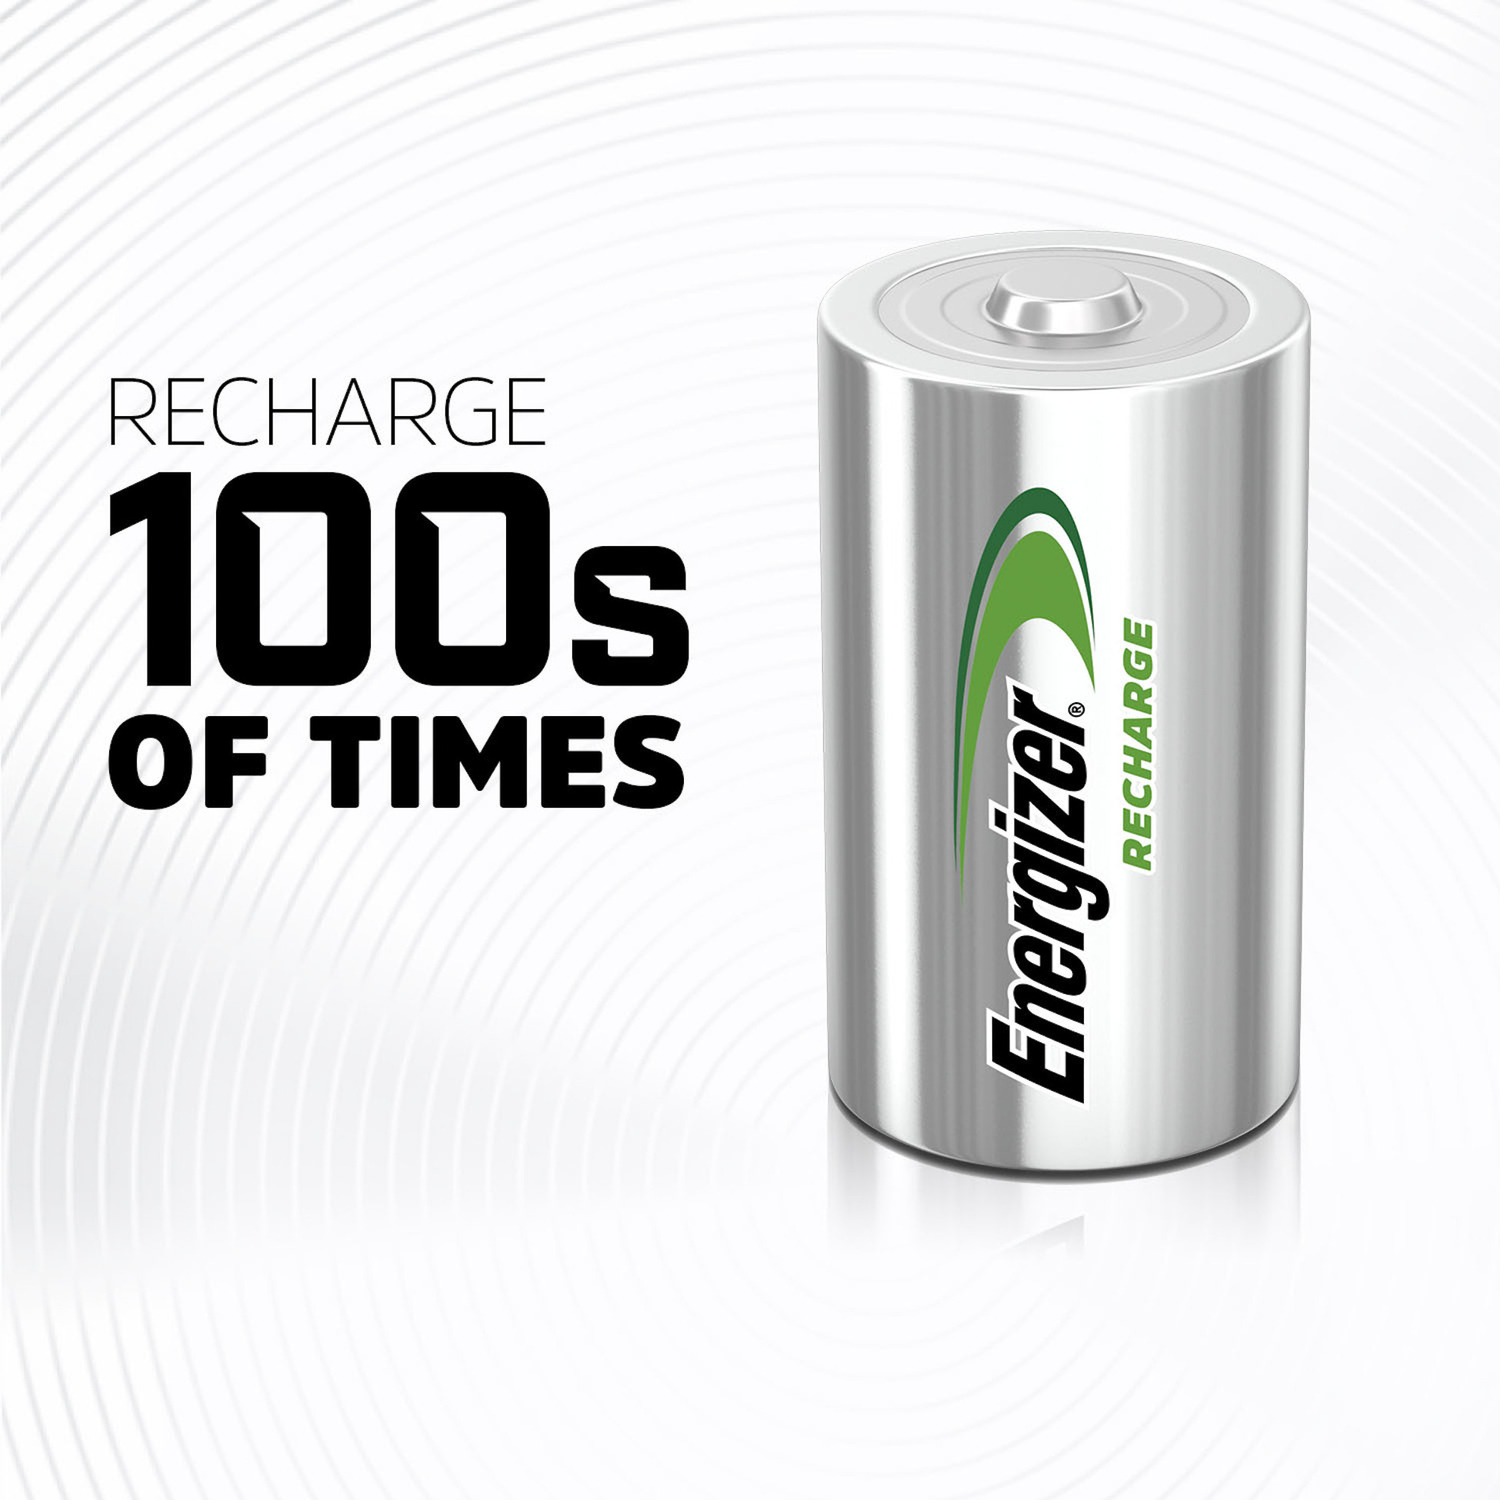 Energizer Recharge NiMH D 1.2 V 2500 Ah Rechargeable Battery NH50BP-2R2 2 pk